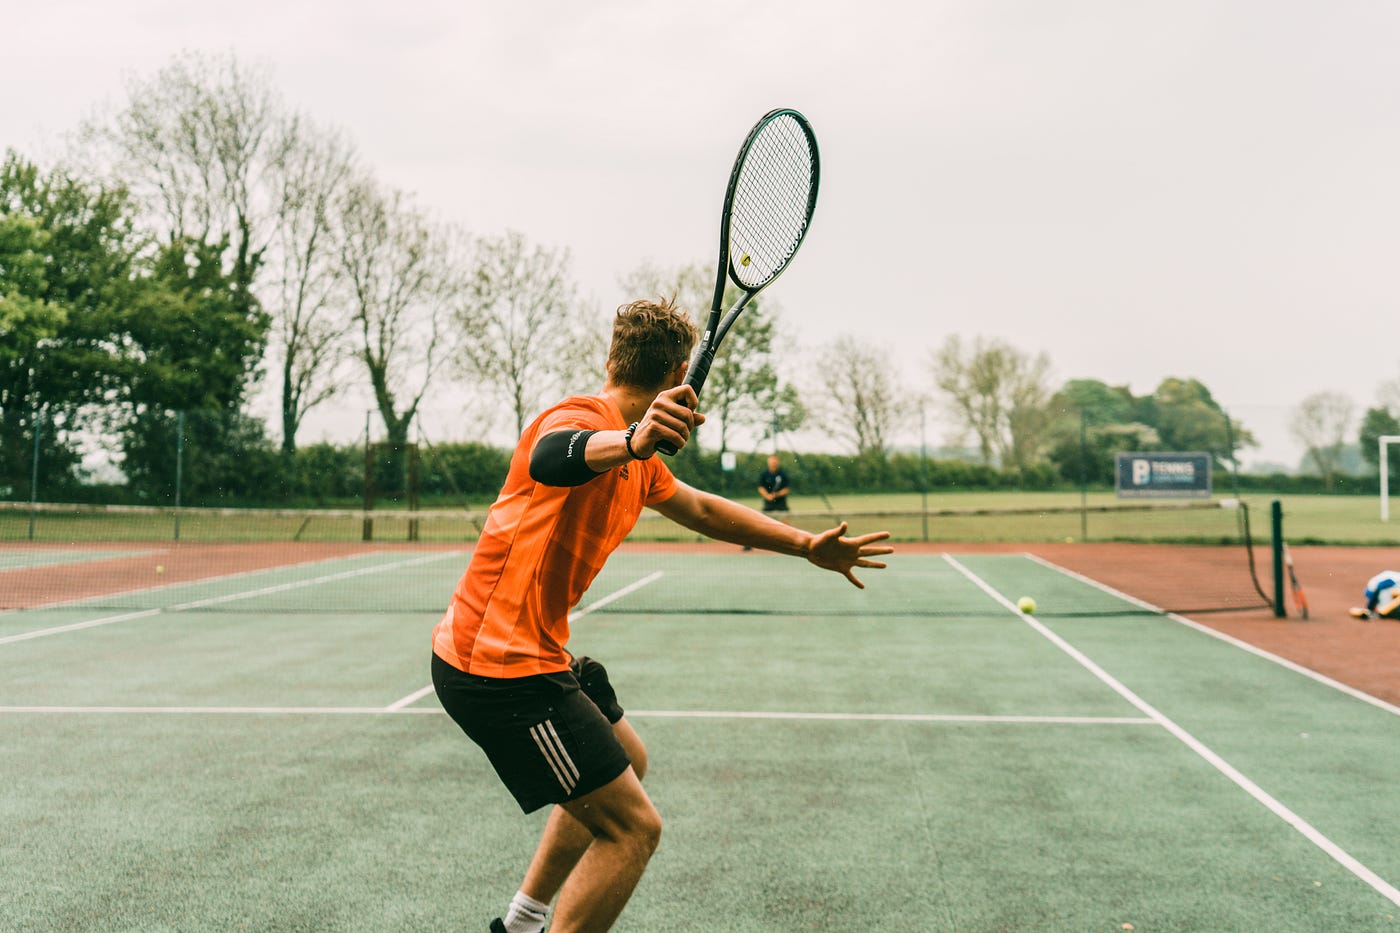 3 Things That Surprised Me About My First Tennis Lesson | by Benya Clark |  Medium